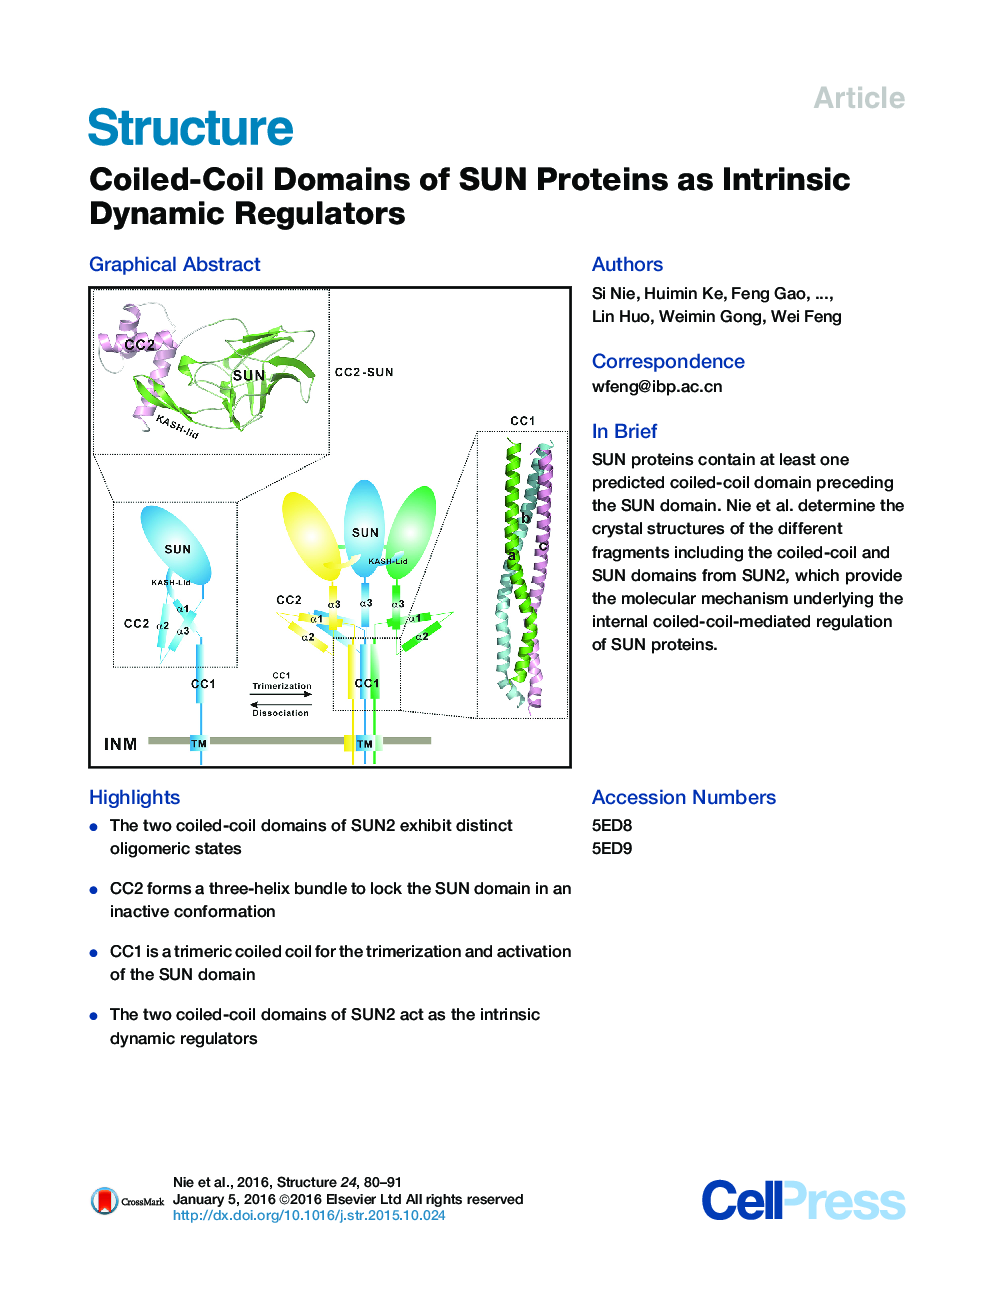 Coiled-Coil Domains of SUN Proteins as Intrinsic Dynamic Regulators